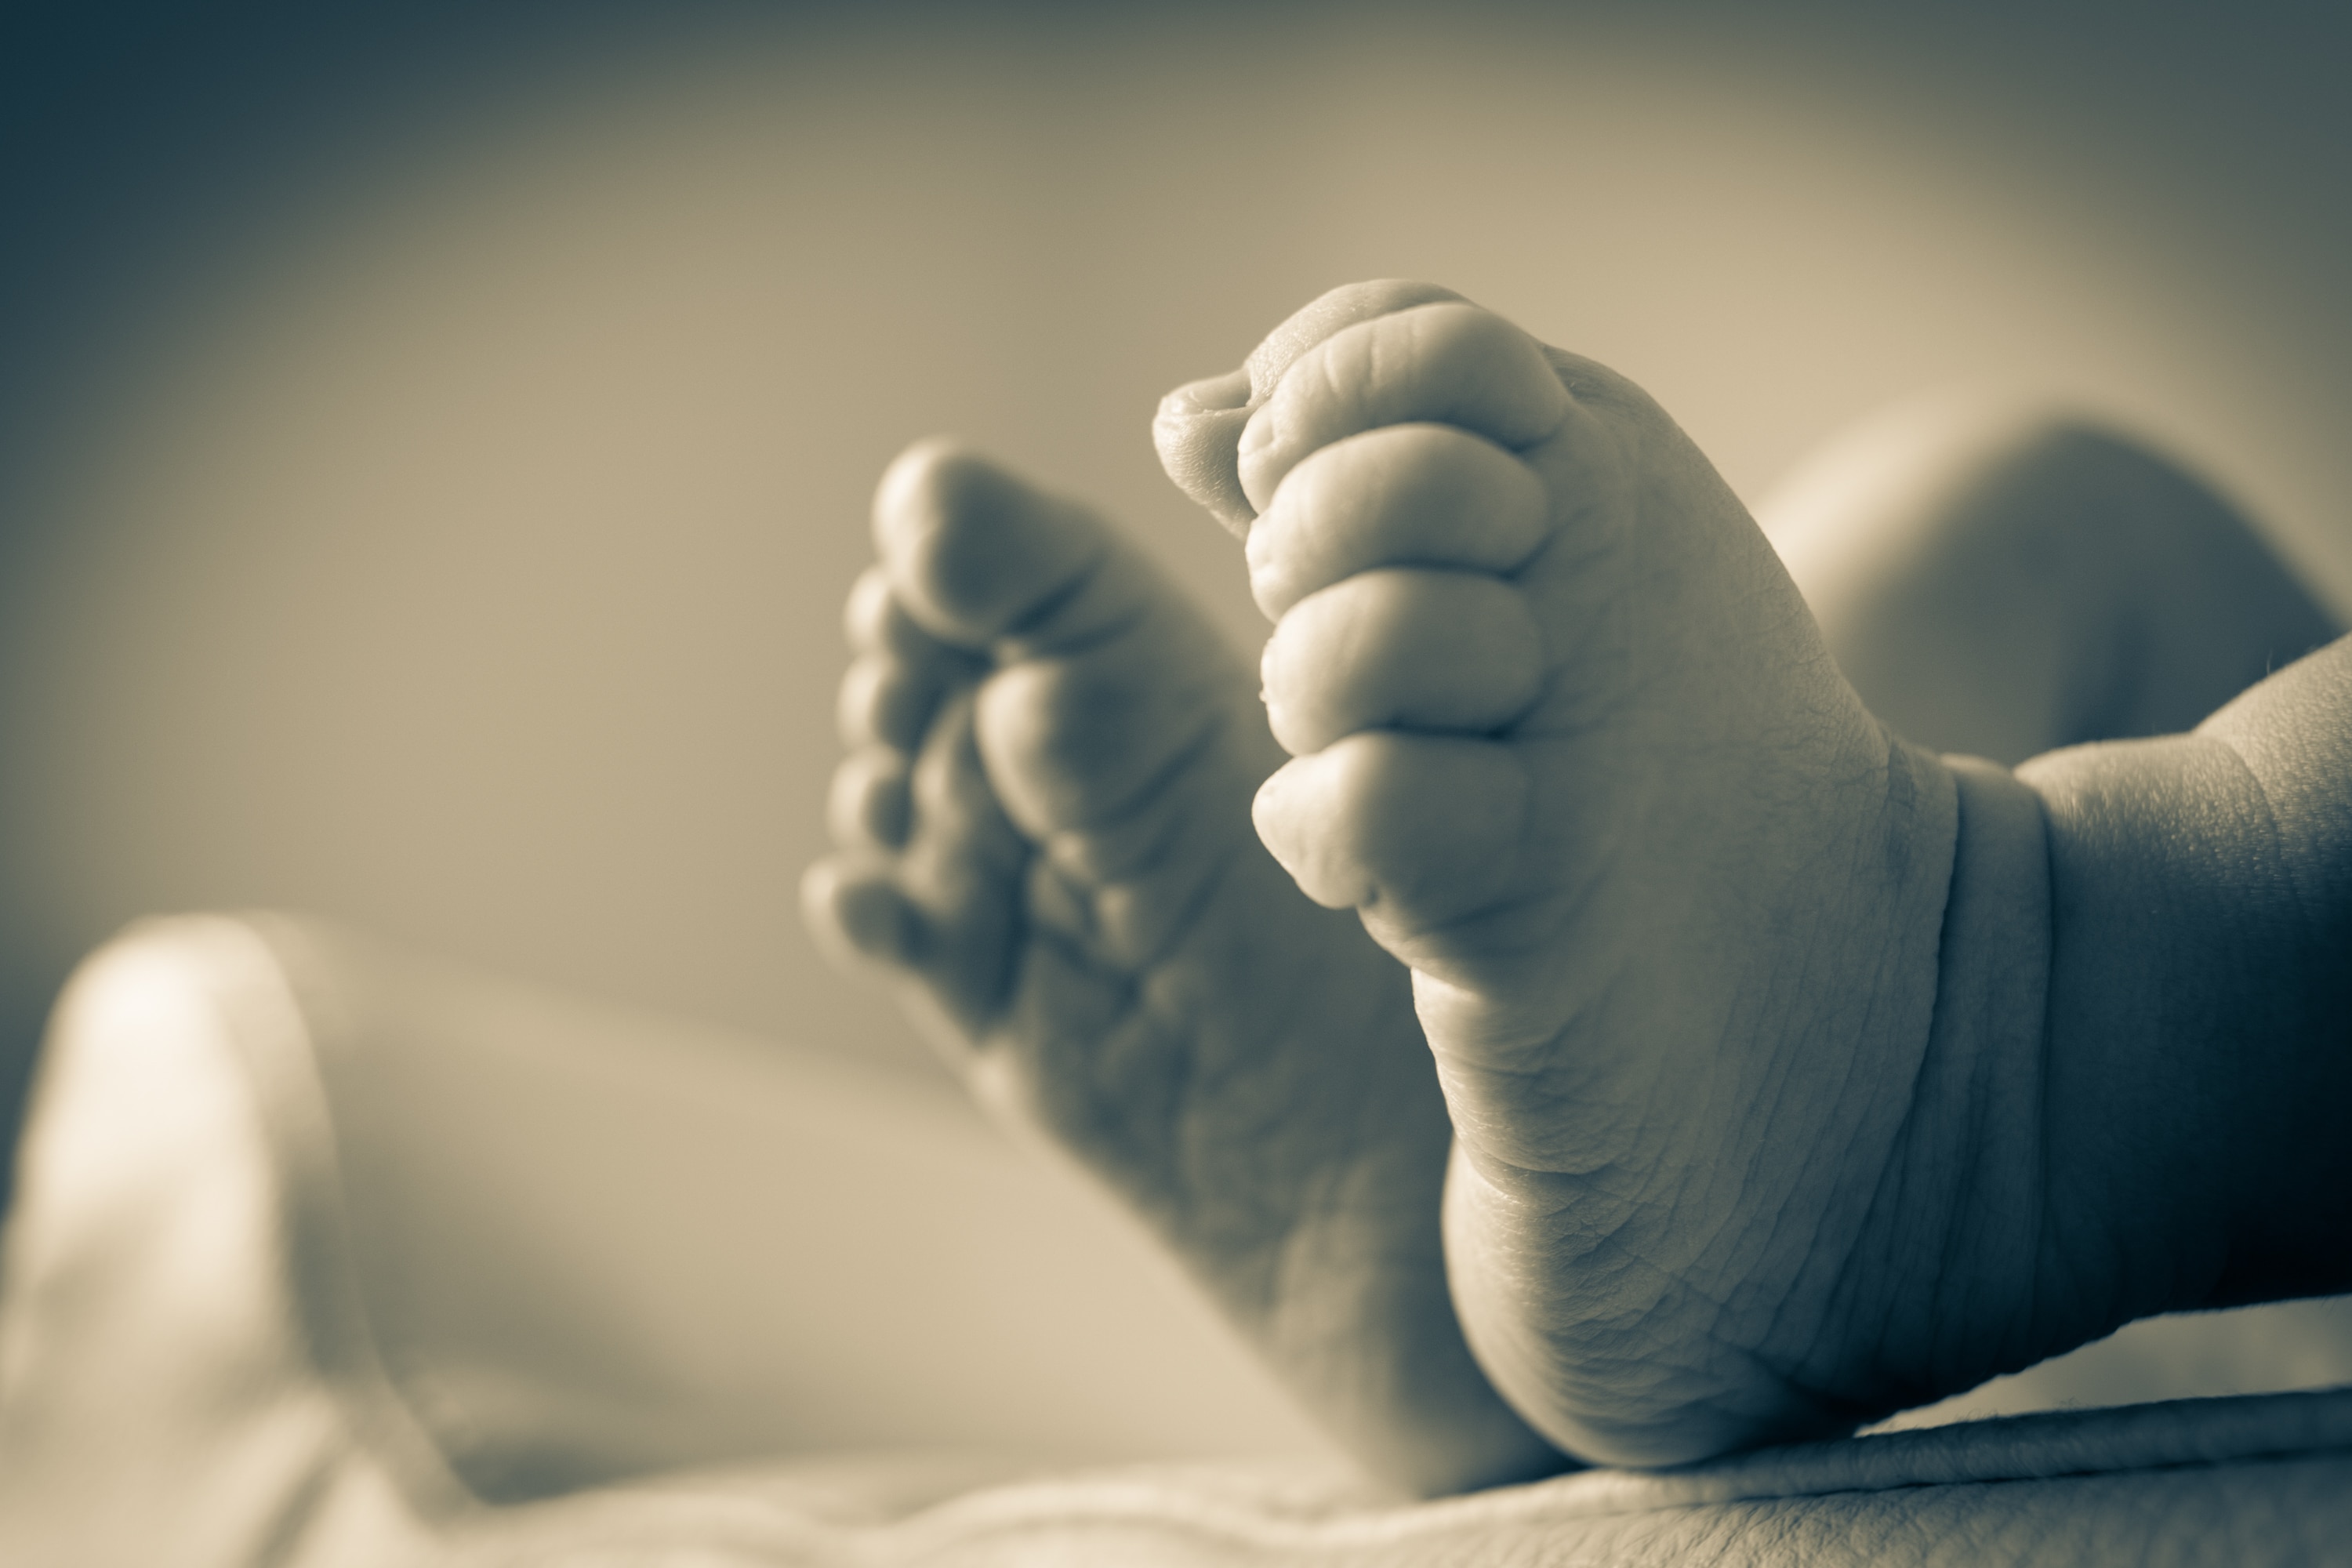 sepia photograph of a baby's foot